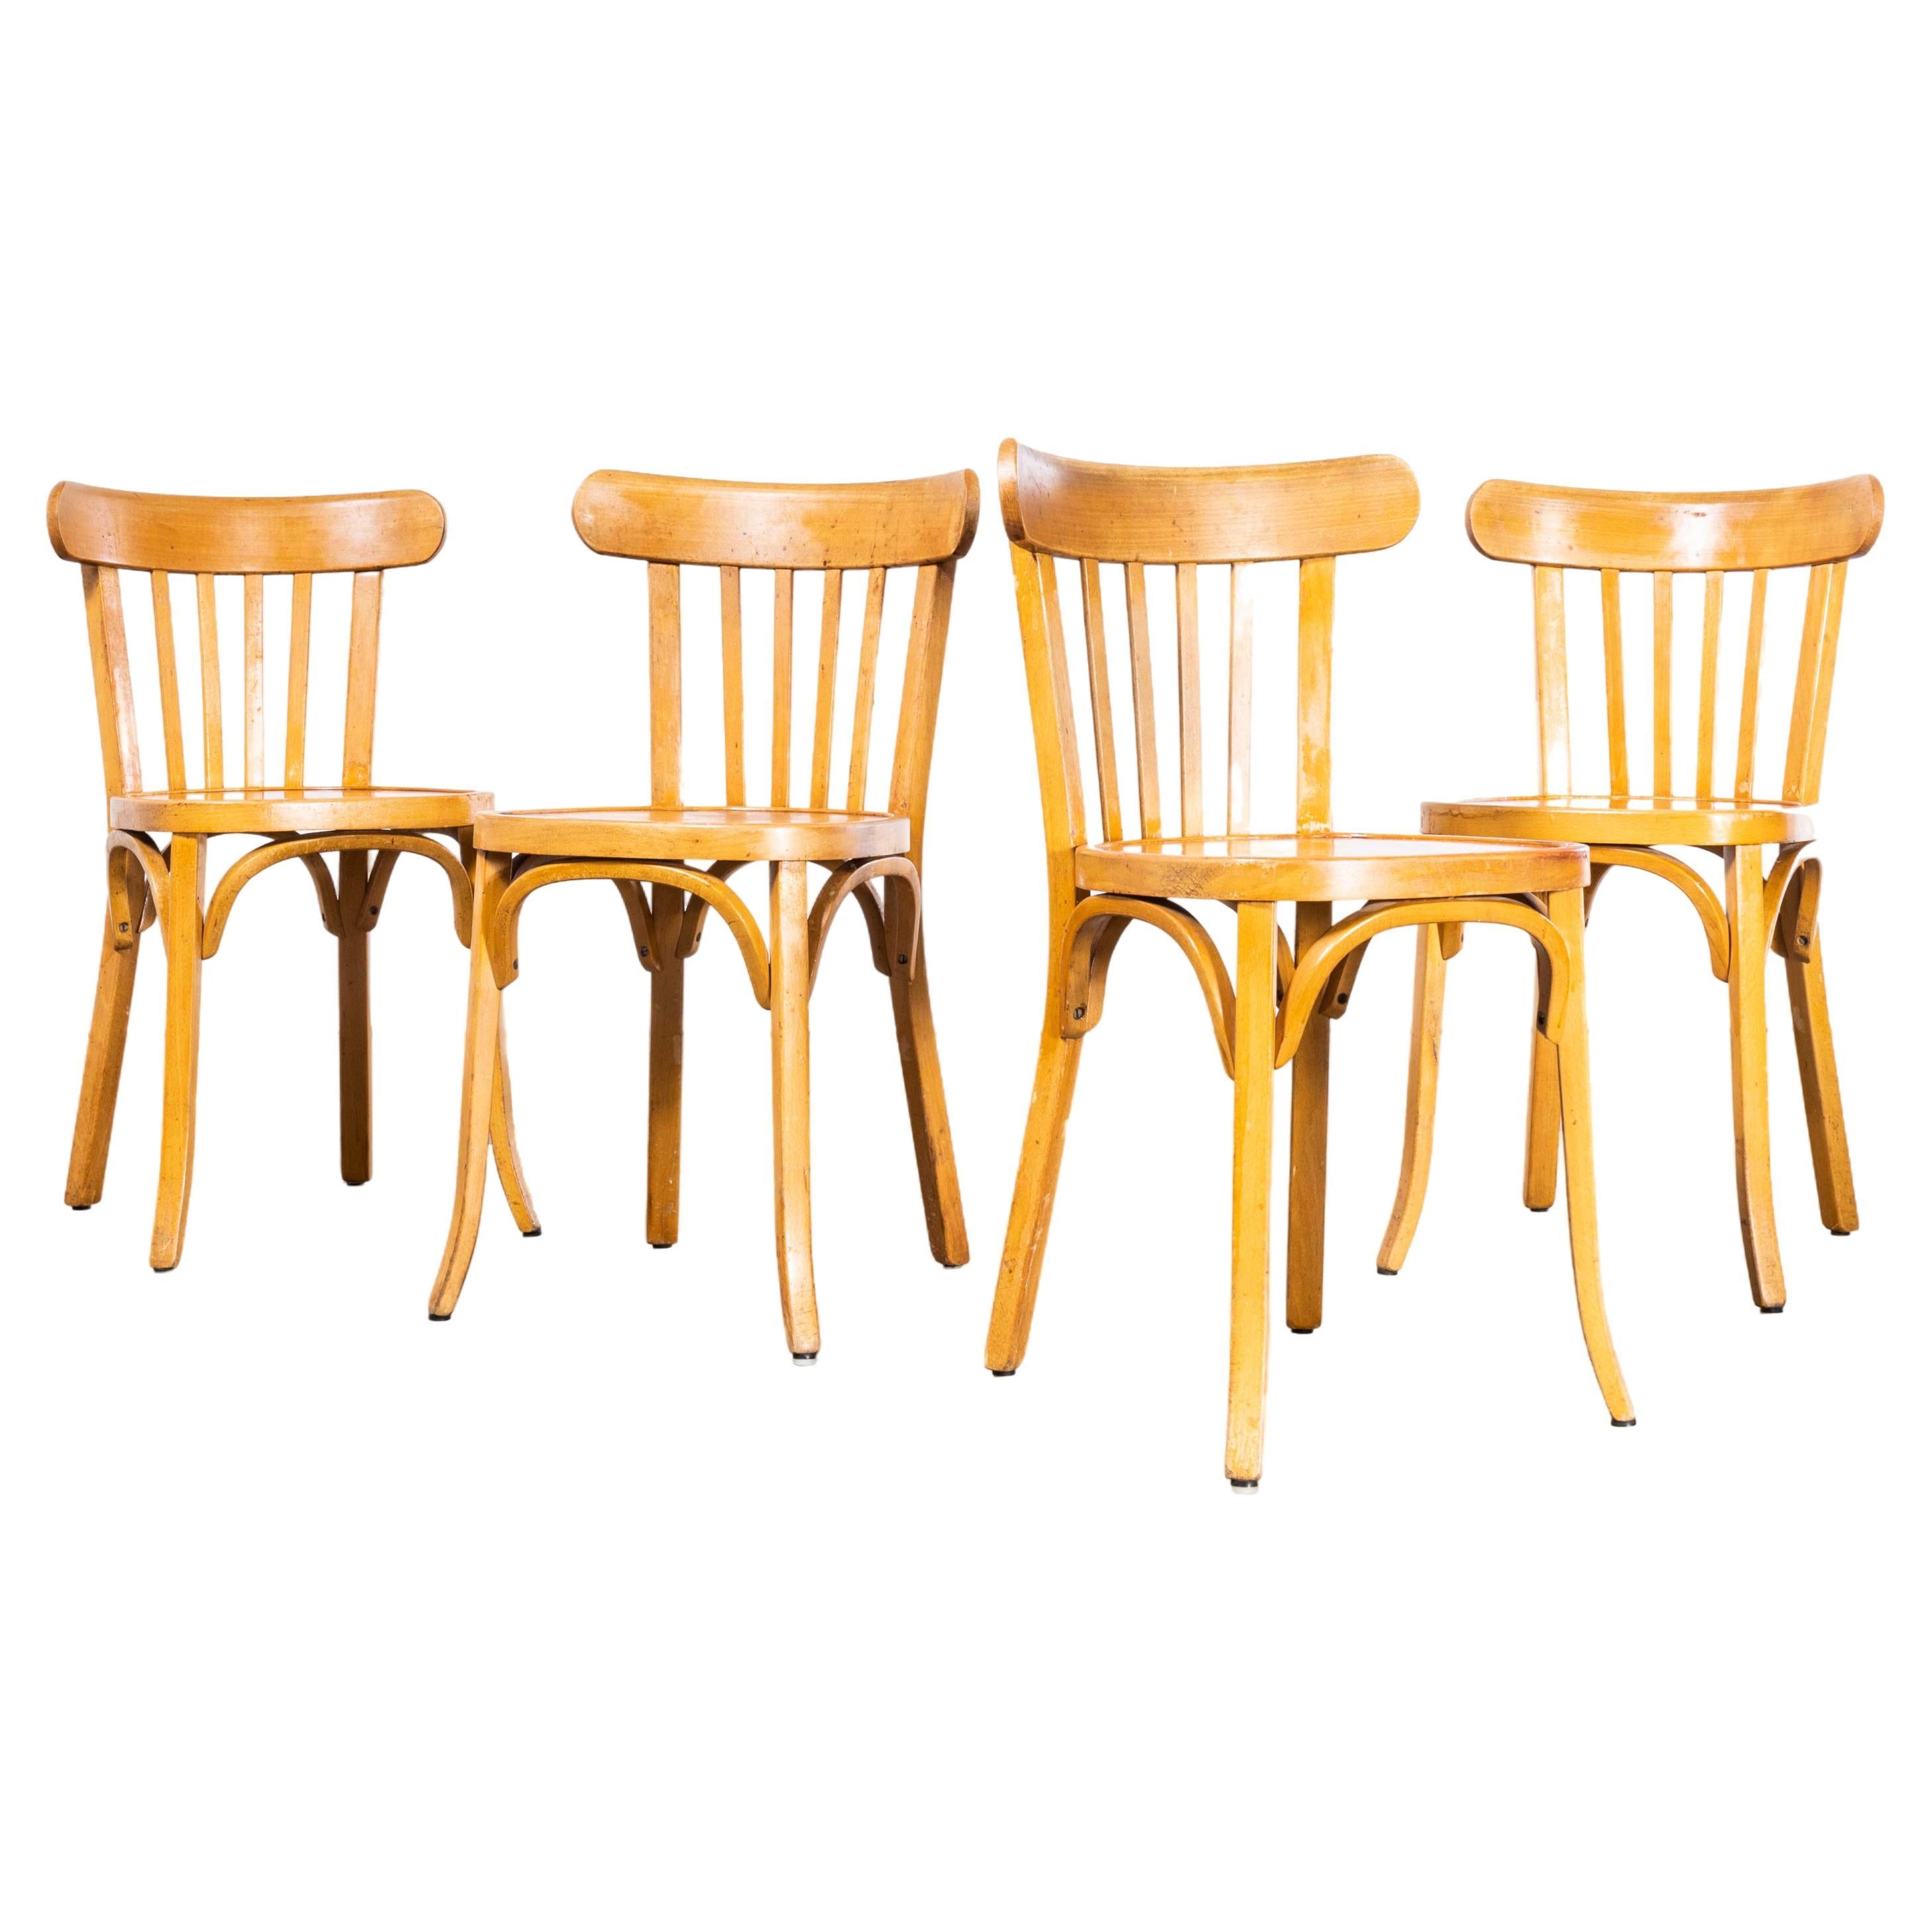 1950's Baumann Bentwood Bistro Dining Chair - Honey - Set O Four For Sale